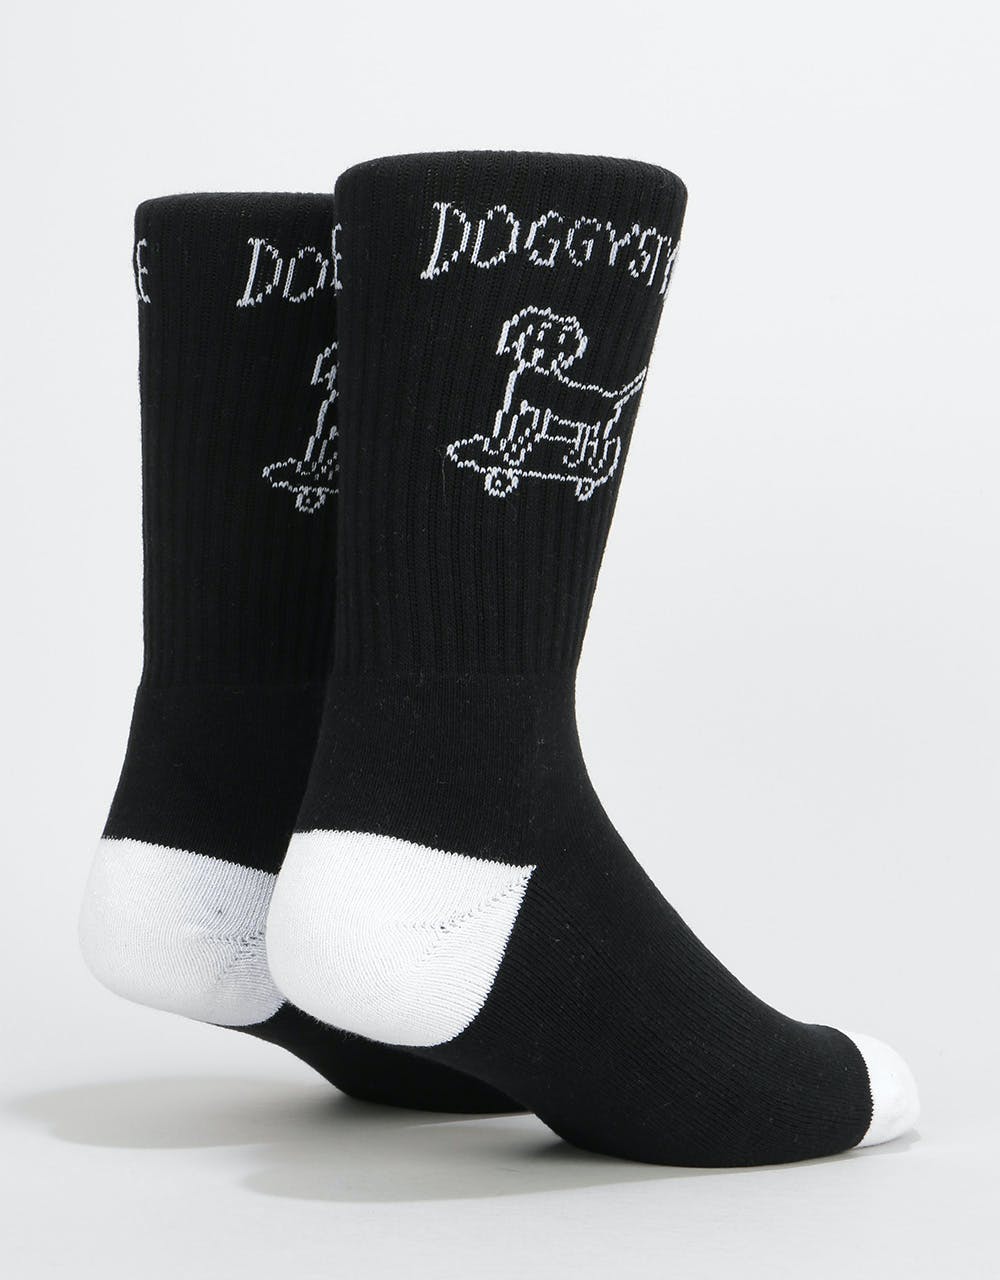 Route One Doggy Style Crew Socks - Black/White